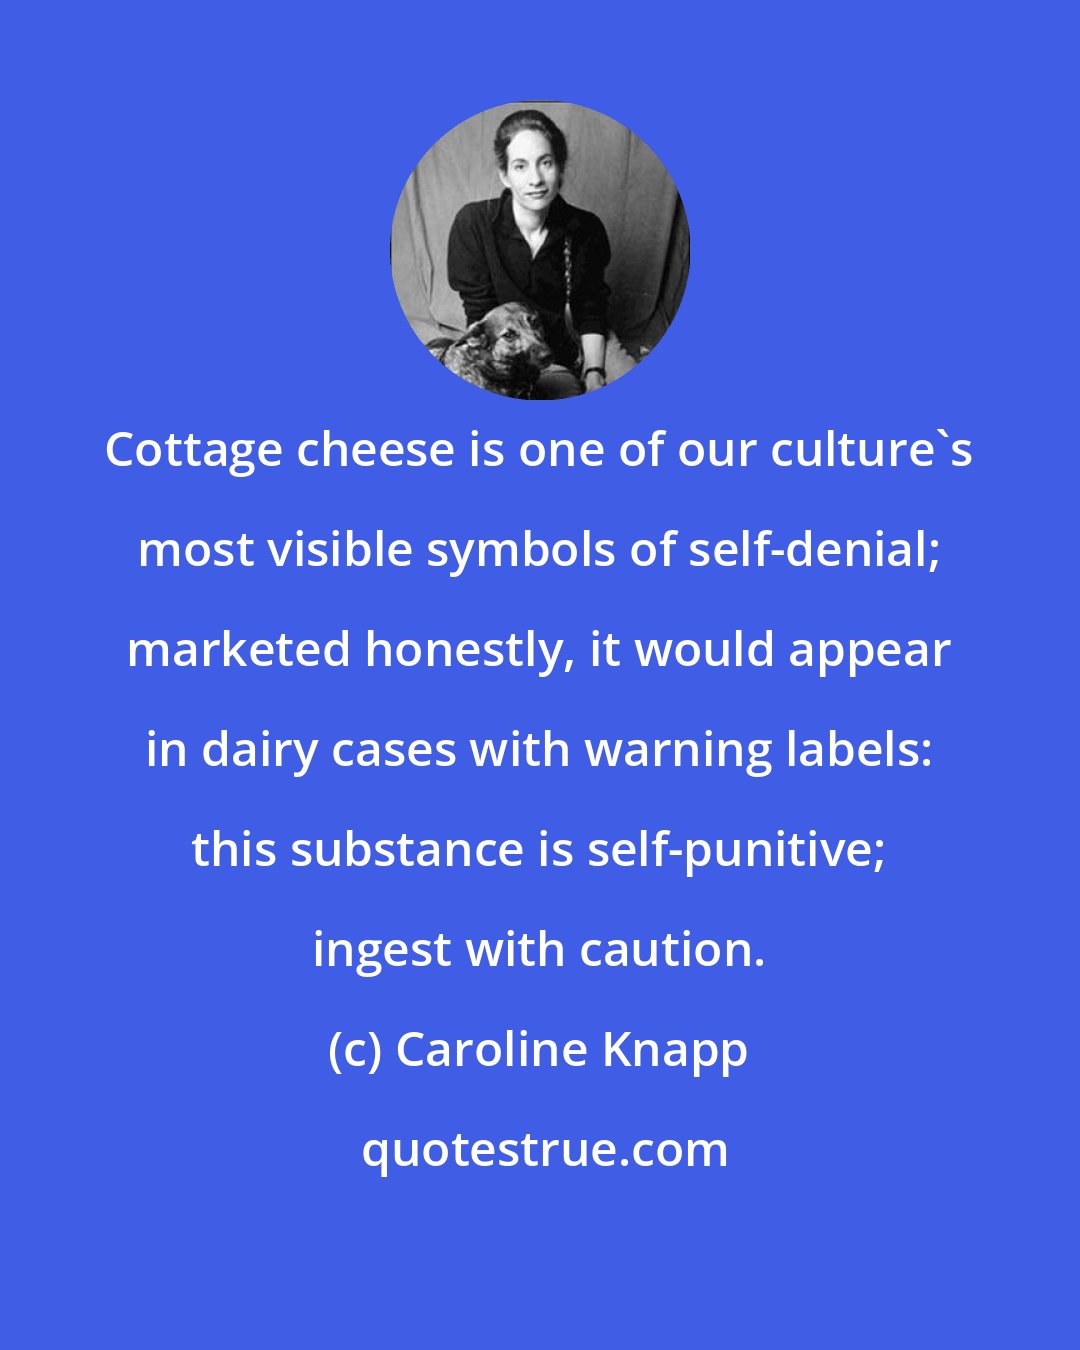 Caroline Knapp: Cottage cheese is one of our culture's most visible symbols of self-denial; marketed honestly, it would appear in dairy cases with warning labels: this substance is self-punitive; ingest with caution.